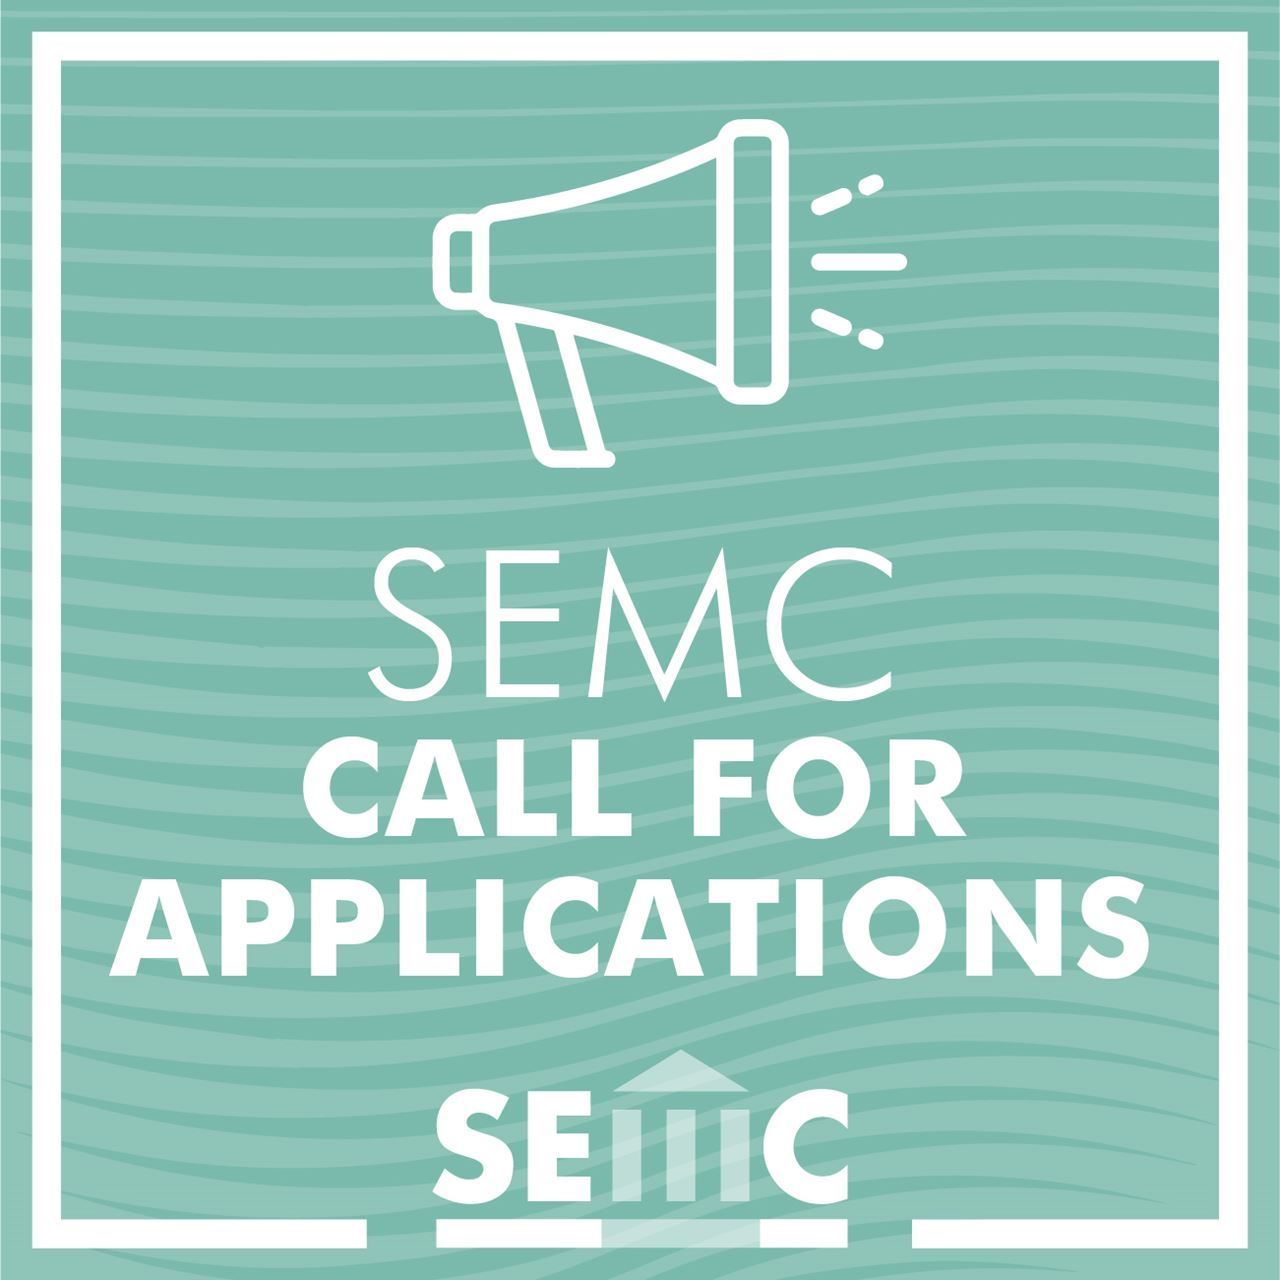 Light green striped background, with a graphic of a megaphone and the words “SEMC Call for Applications” centered. The SEMC logo is also at the bottom. 